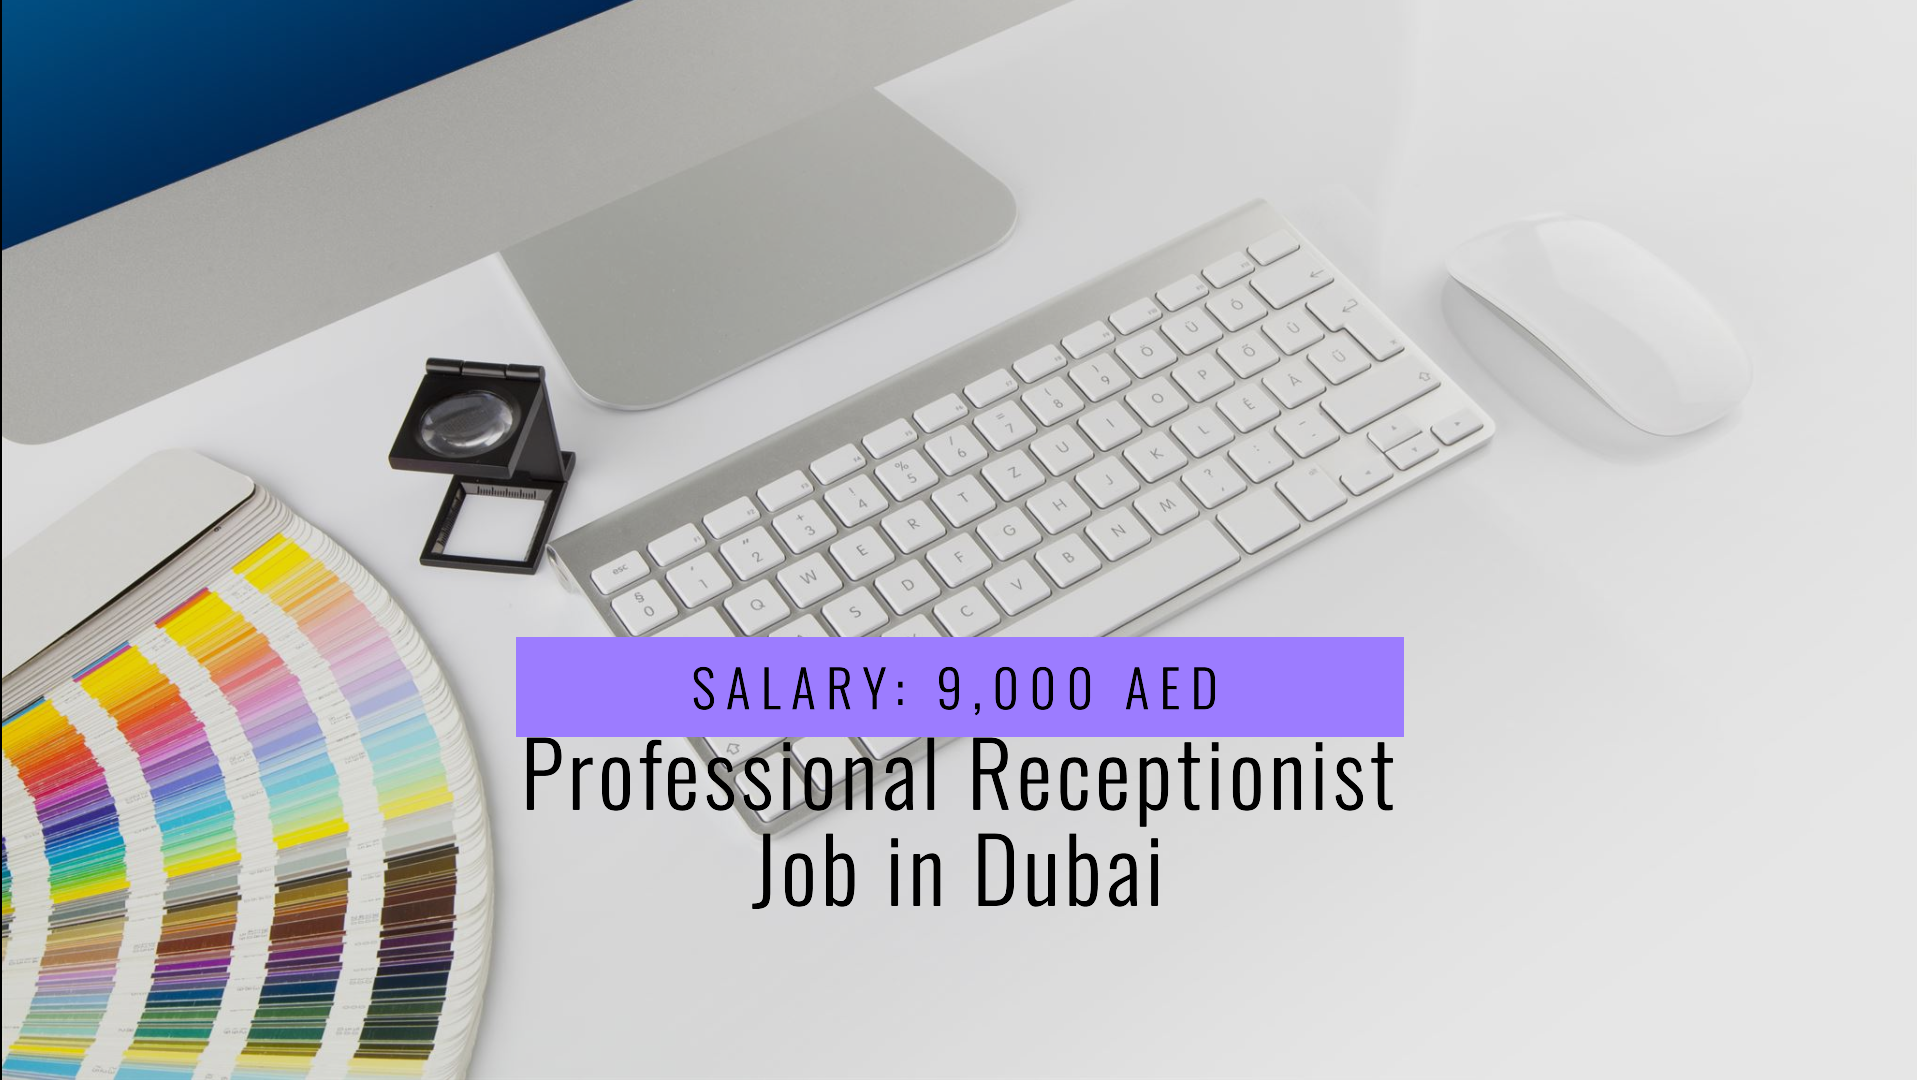 Receptionist jobs UAE with salary 9,000 AED